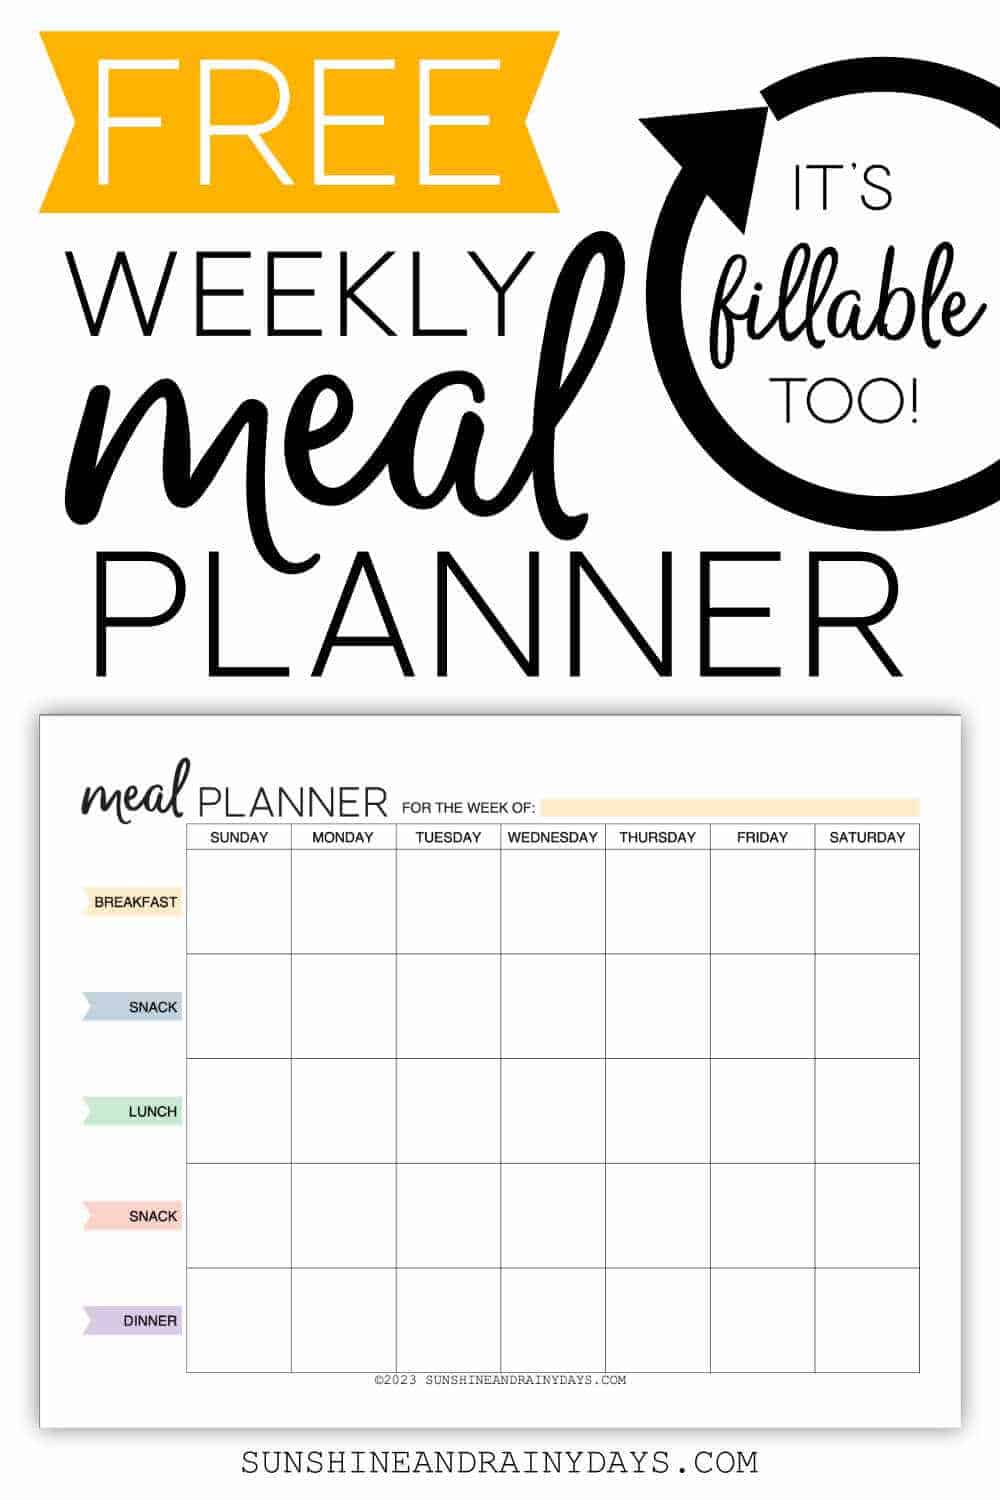 Printable Weekly Meal Planner - Sunshine and Rainy Days